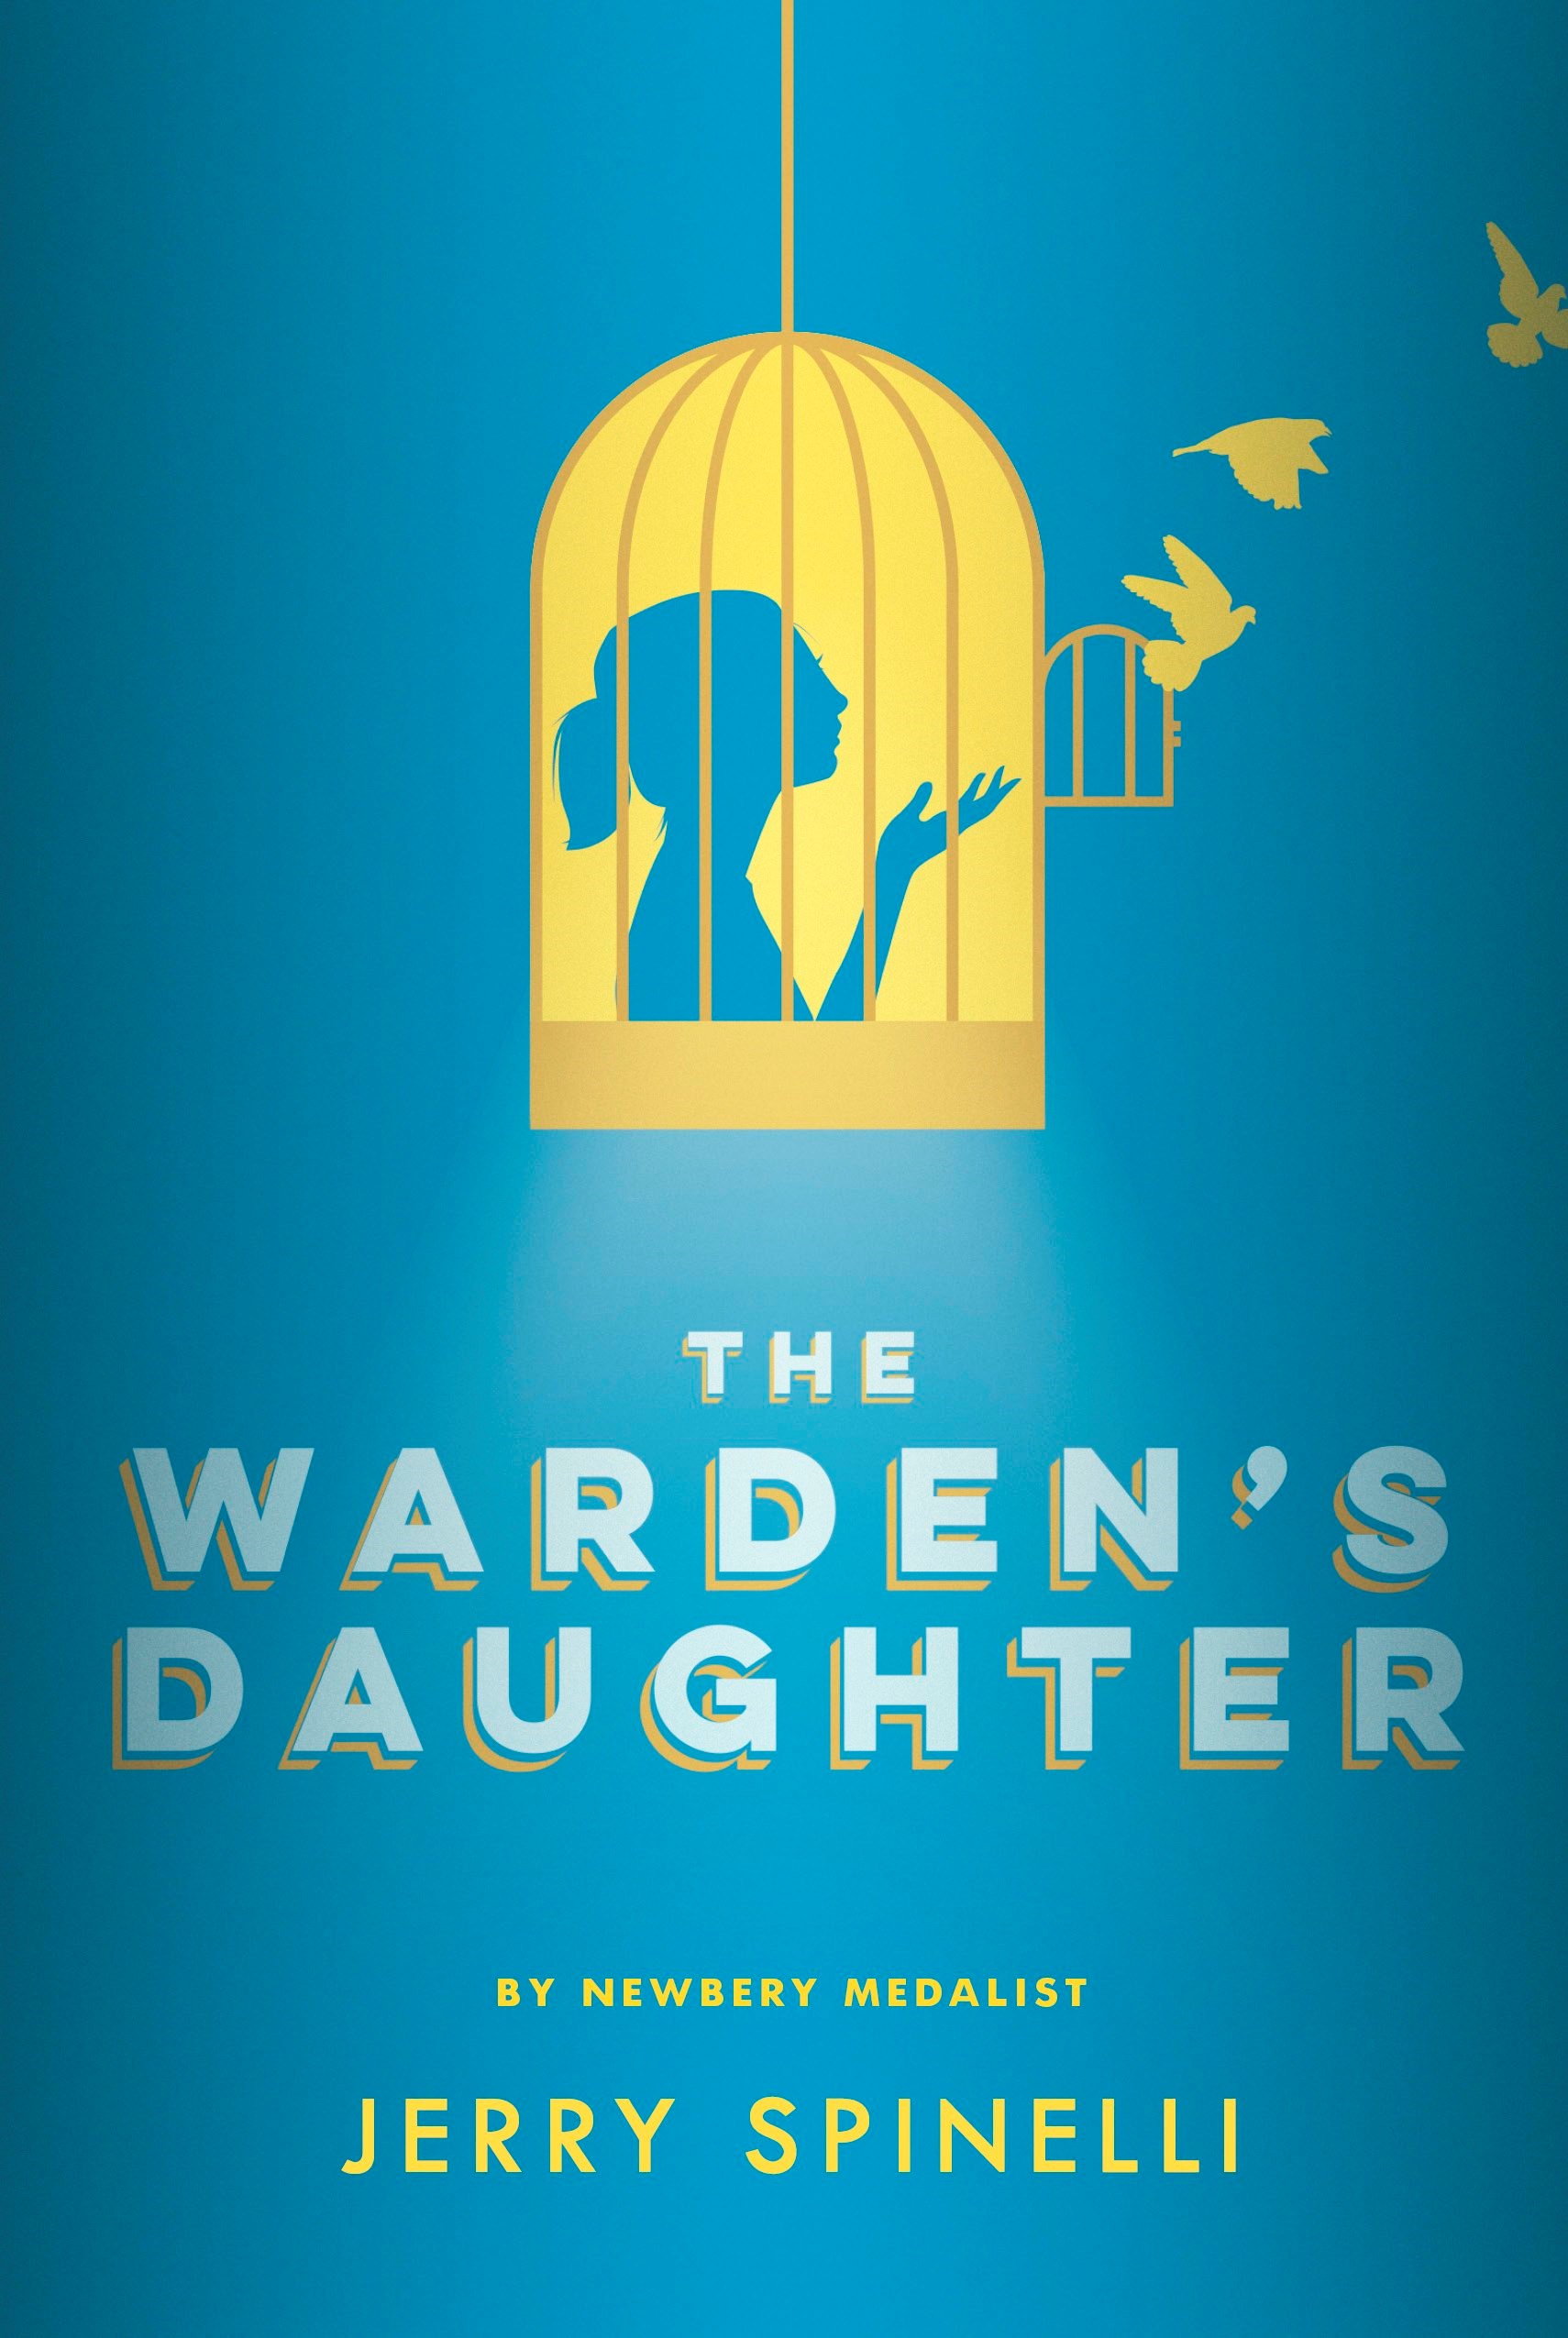 The Warden’s Daughter